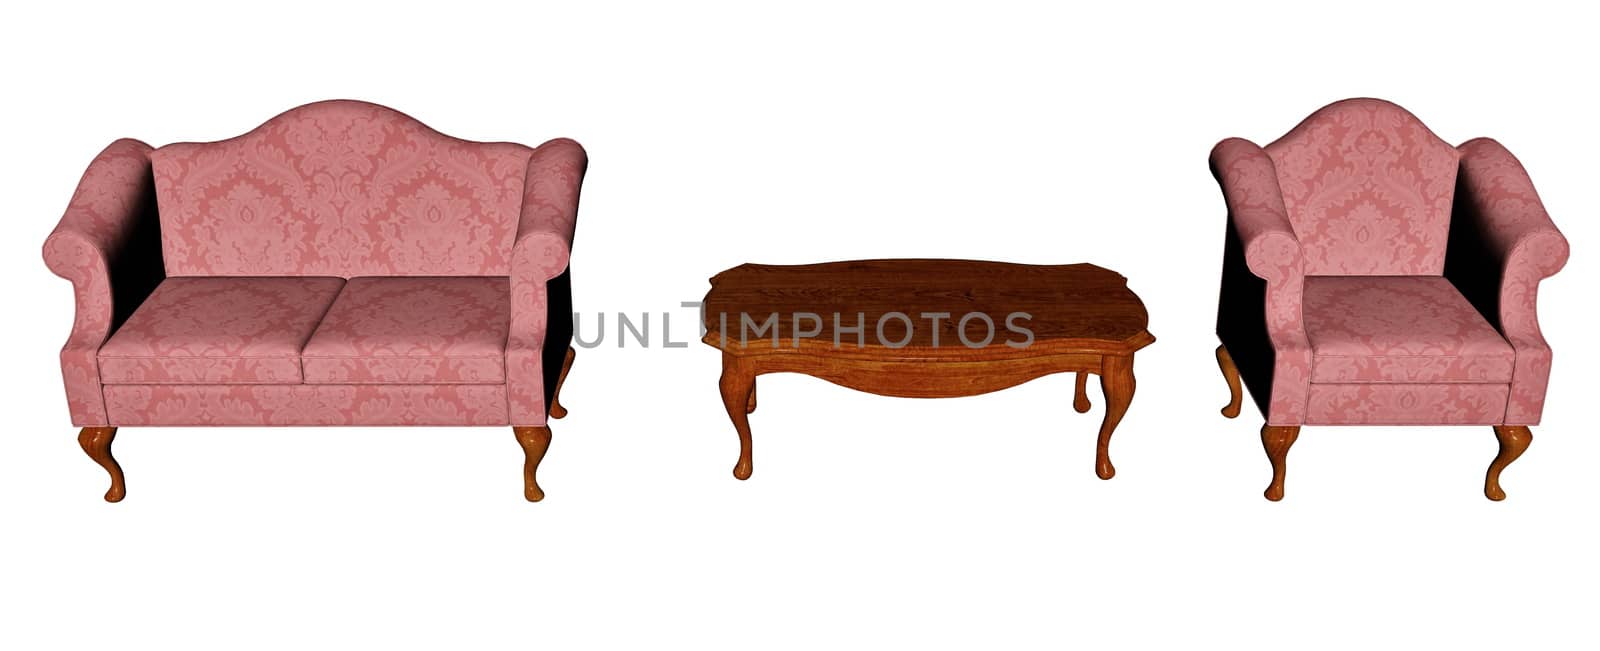 Vintage chair, sofa and table isolated in white background